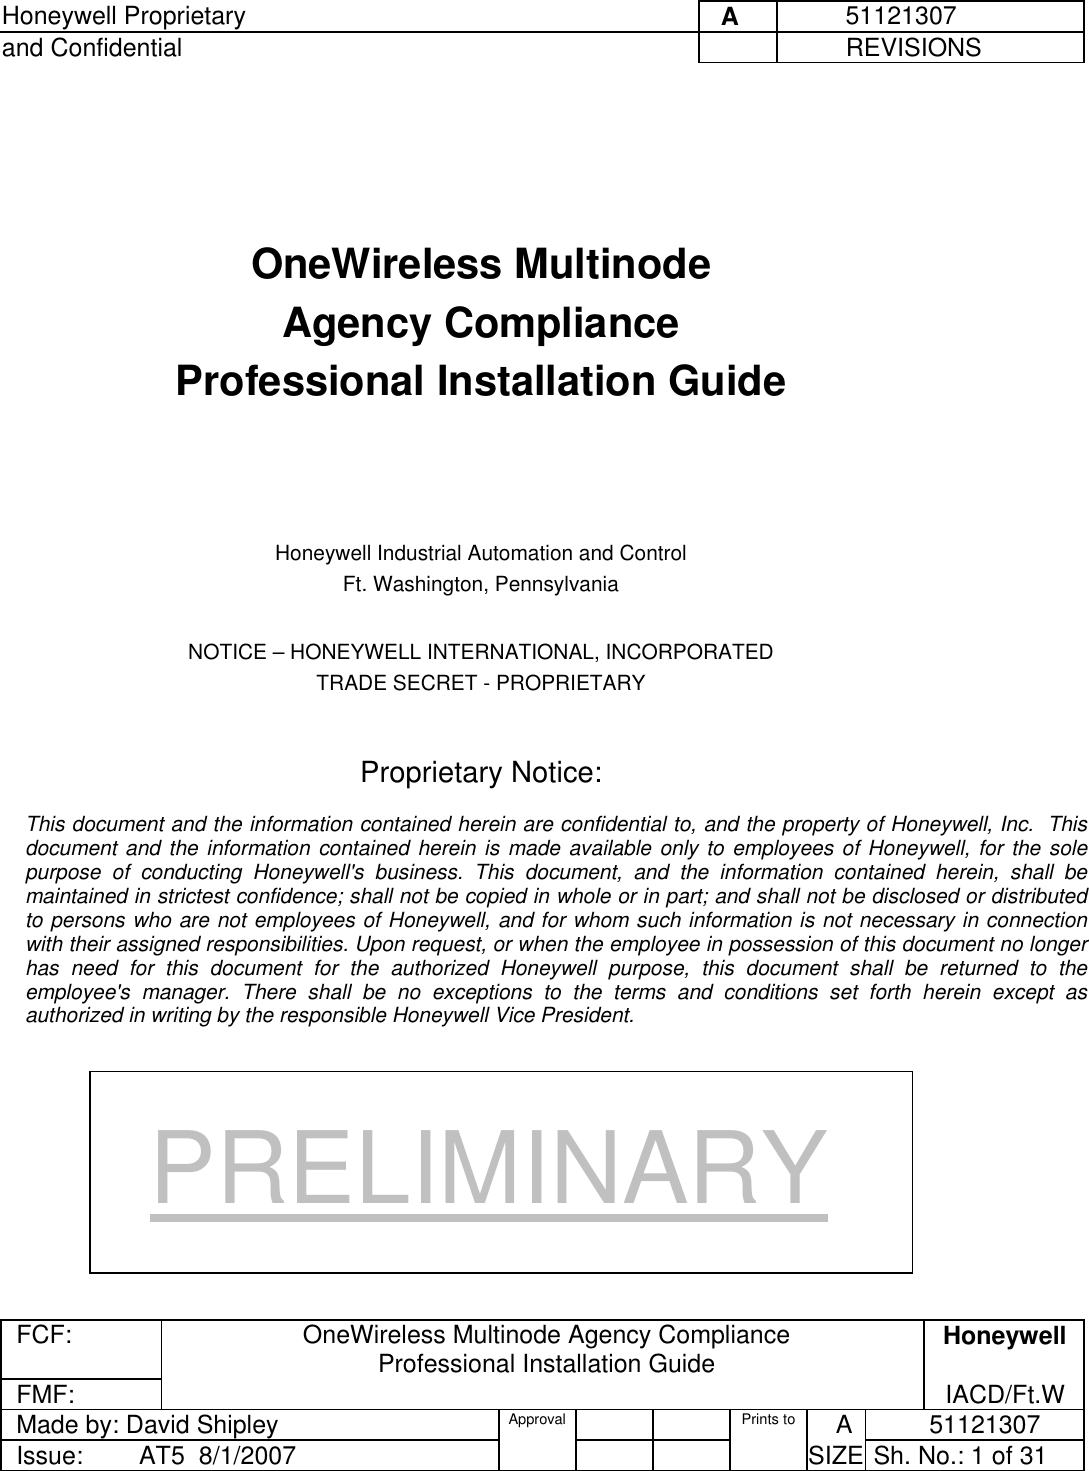 Honeywell Proprietary     A          51121307 and Confidential             REVISIONS  FCF:  OneWireless Multinode Agency Compliance Professional Installation Guide  Honeywell FMF:               IACD/Ft.W Made by: David Shipley  Approval   Prints to     A           51121307 Issue:        AT5  8/1/2007          SIZE  Sh. No.: 1 of 31      OneWireless Multinode  Agency Compliance Professional Installation Guide      Honeywell Industrial Automation and Control Ft. Washington, Pennsylvania  NOTICE – HONEYWELL INTERNATIONAL, INCORPORATED TRADE SECRET - PROPRIETARY   Proprietary Notice:  This document and the information contained herein are confidential to, and the property of Honeywell, Inc.  This document and the information contained herein is made available only to employees of Honeywell, for the sole purpose of conducting Honeywell&apos;s business. This document, and the information contained herein, shall be maintained in strictest confidence; shall not be copied in whole or in part; and shall not be disclosed or distributed to persons who are not employees of Honeywell, and for whom such information is not necessary in connection with their assigned responsibilities. Upon request, or when the employee in possession of this document no longer has need for this document for the authorized Honeywell purpose, this document shall be returned to the employee&apos;s manager. There shall be no exceptions to the terms and conditions set forth herein except as authorized in writing by the responsible Honeywell Vice President. PRELIMINARY 